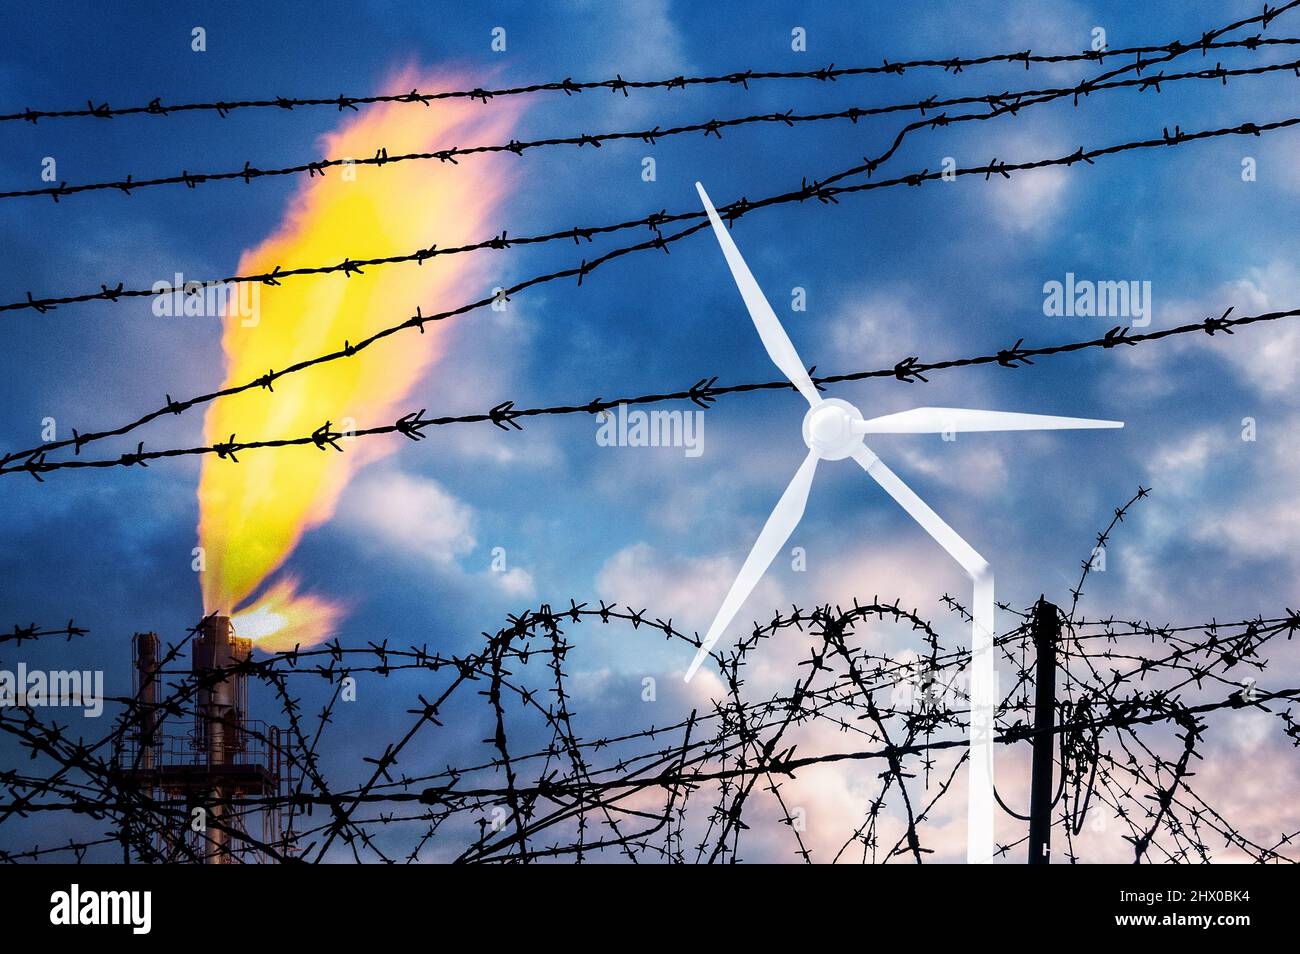 Industrial gas plant behind barbed wire fence with broken wind turbine. Energy crisis, Russia, Ukraine conflict, cop 26, war, renewables, fossil fuel Stock Photo